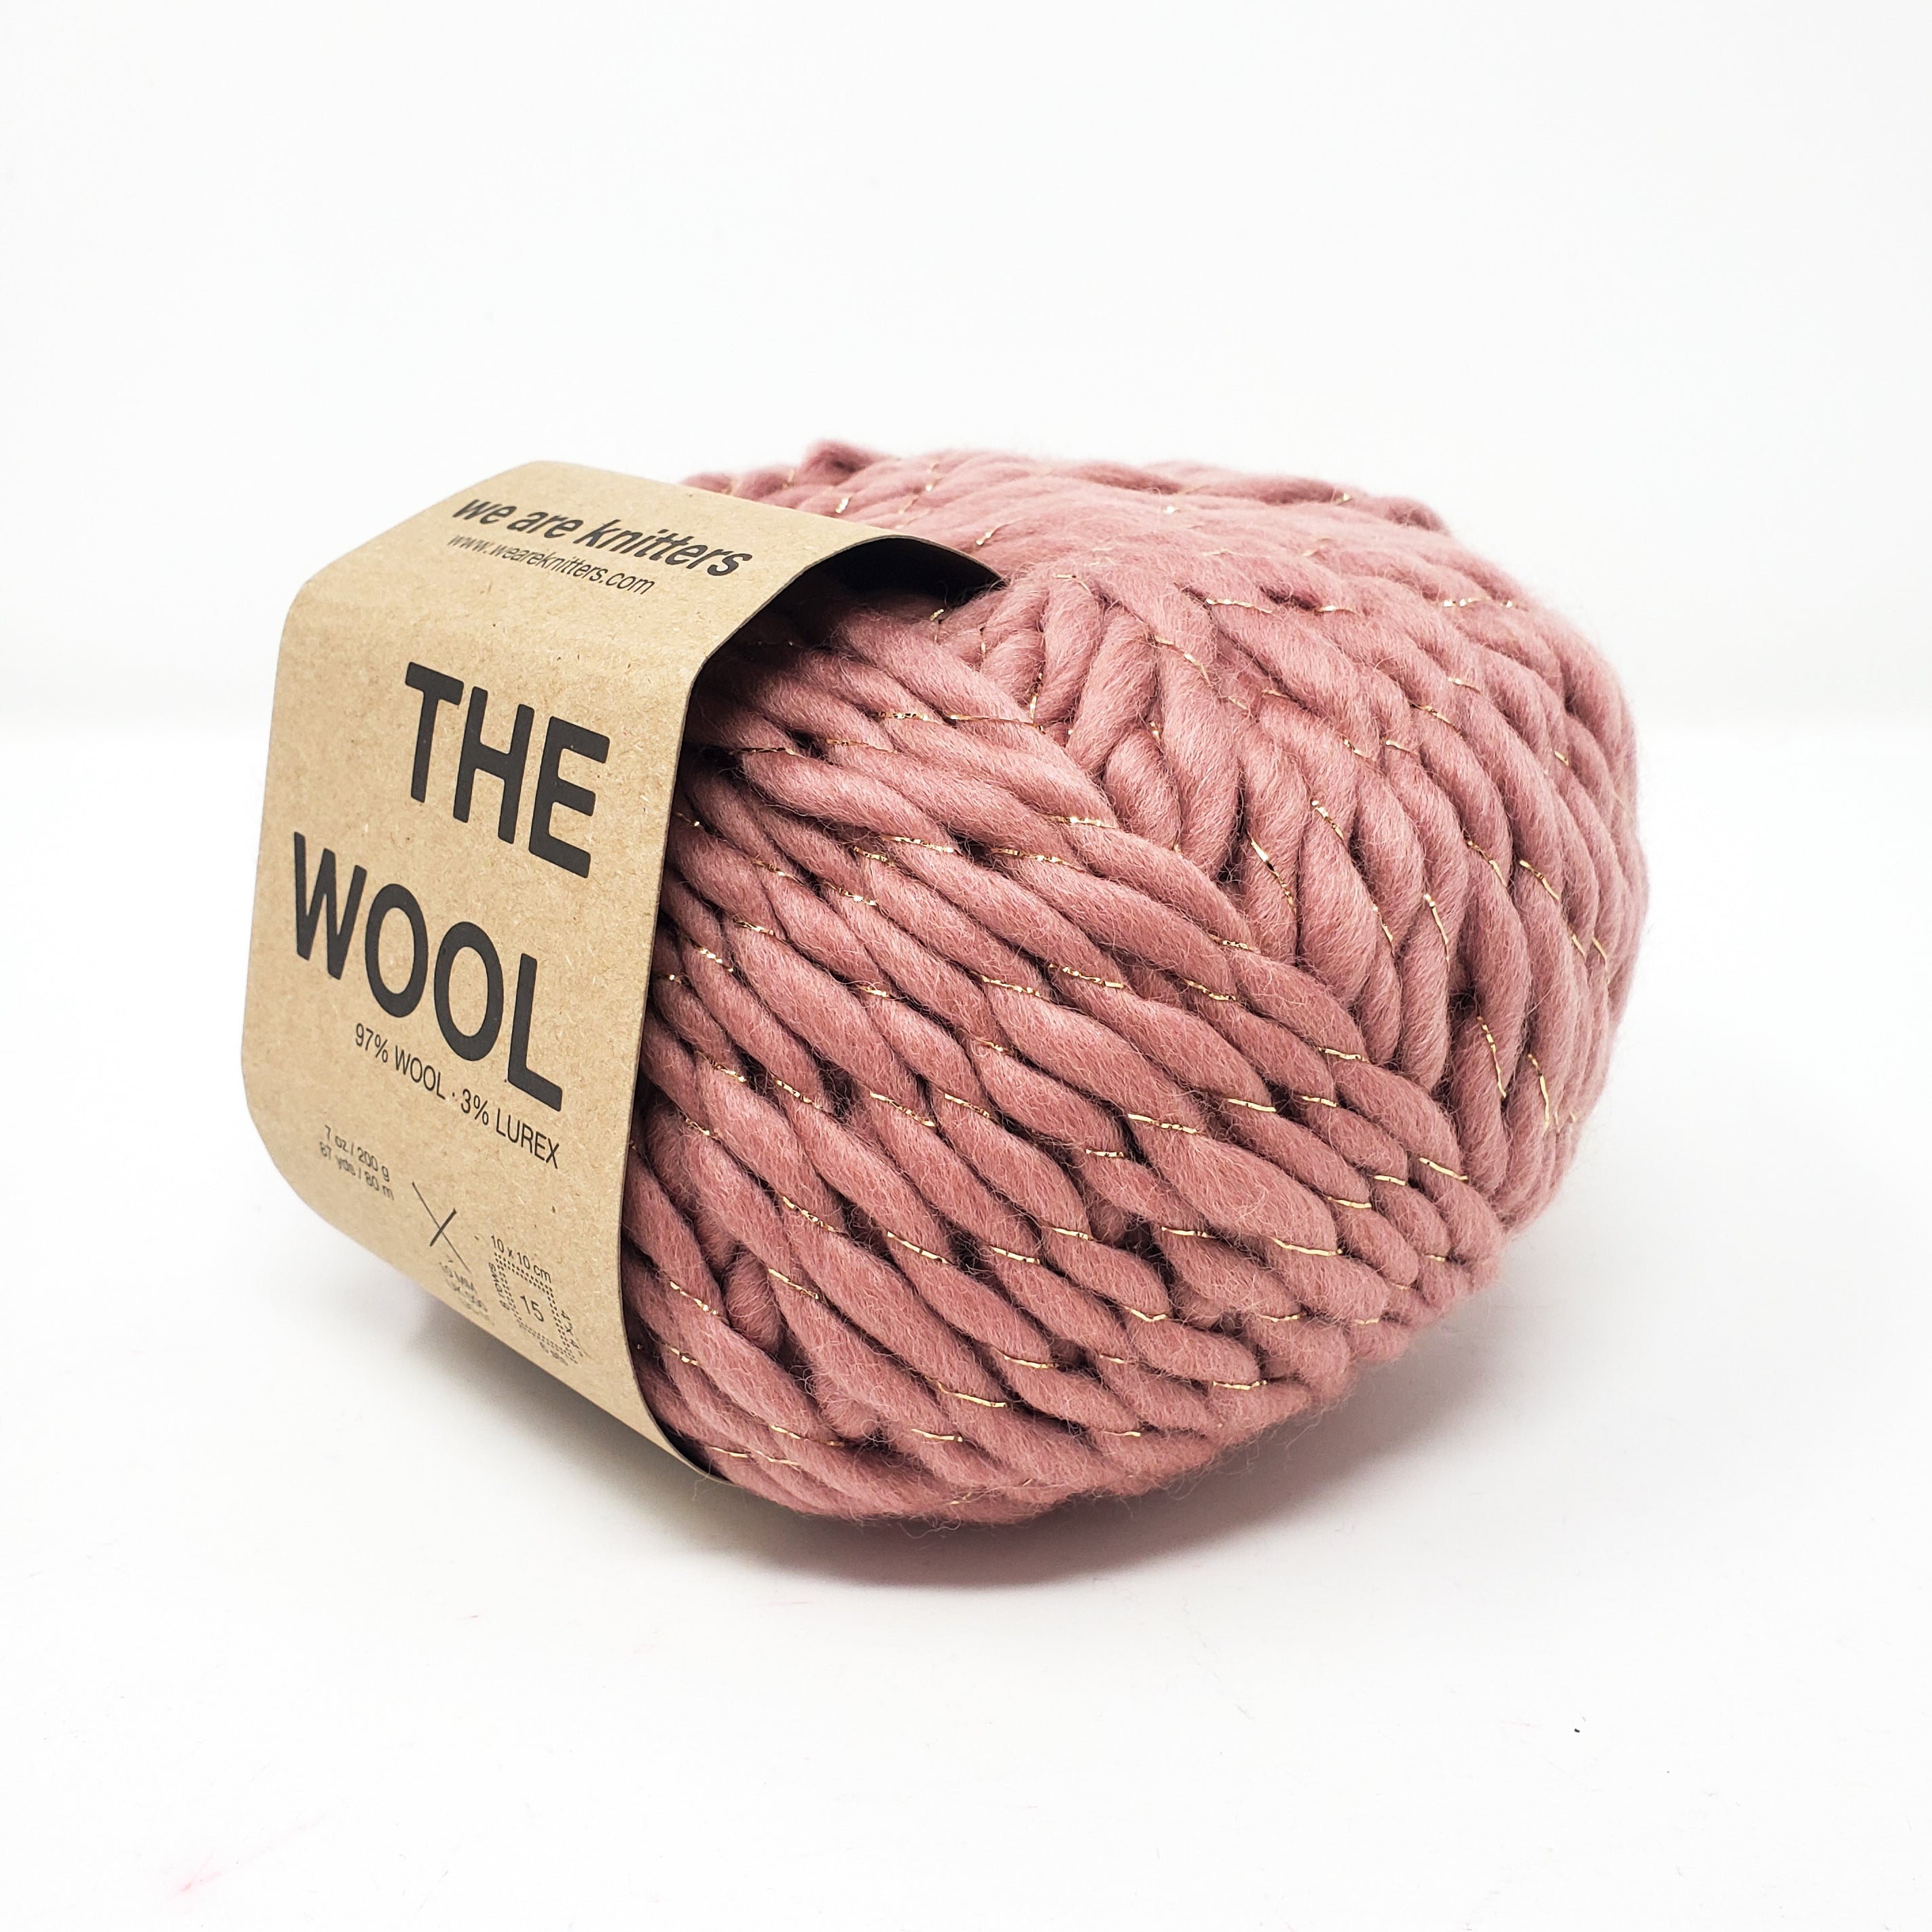 Sparkling Dusty Pink - The Wool - 0